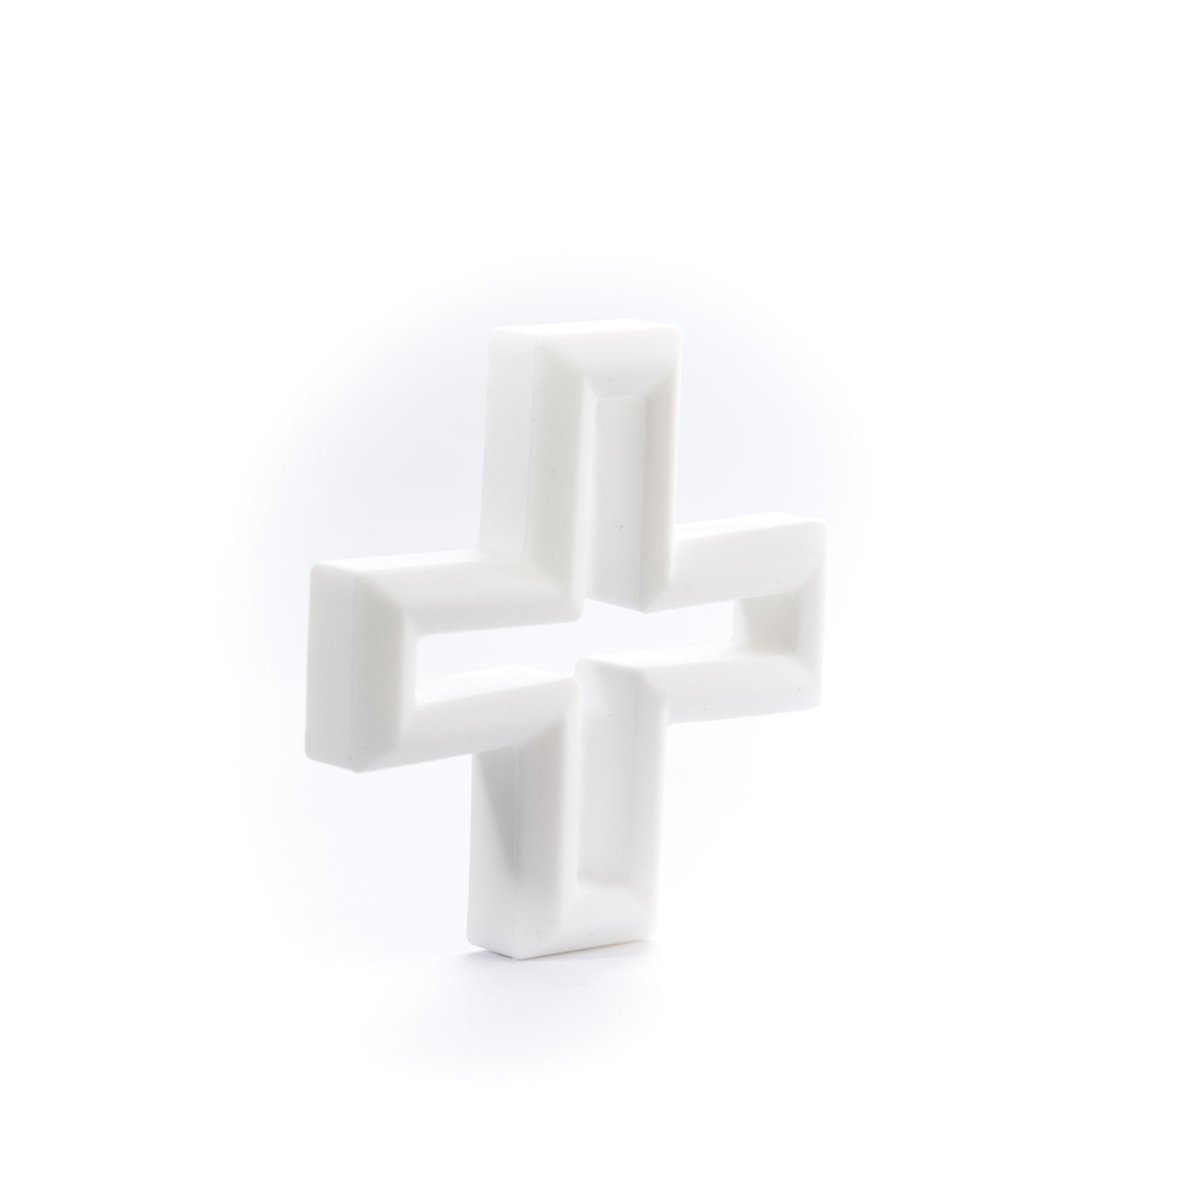 Silicone Teethers and Pendants Crosses White from Cara & Co Craft Supply